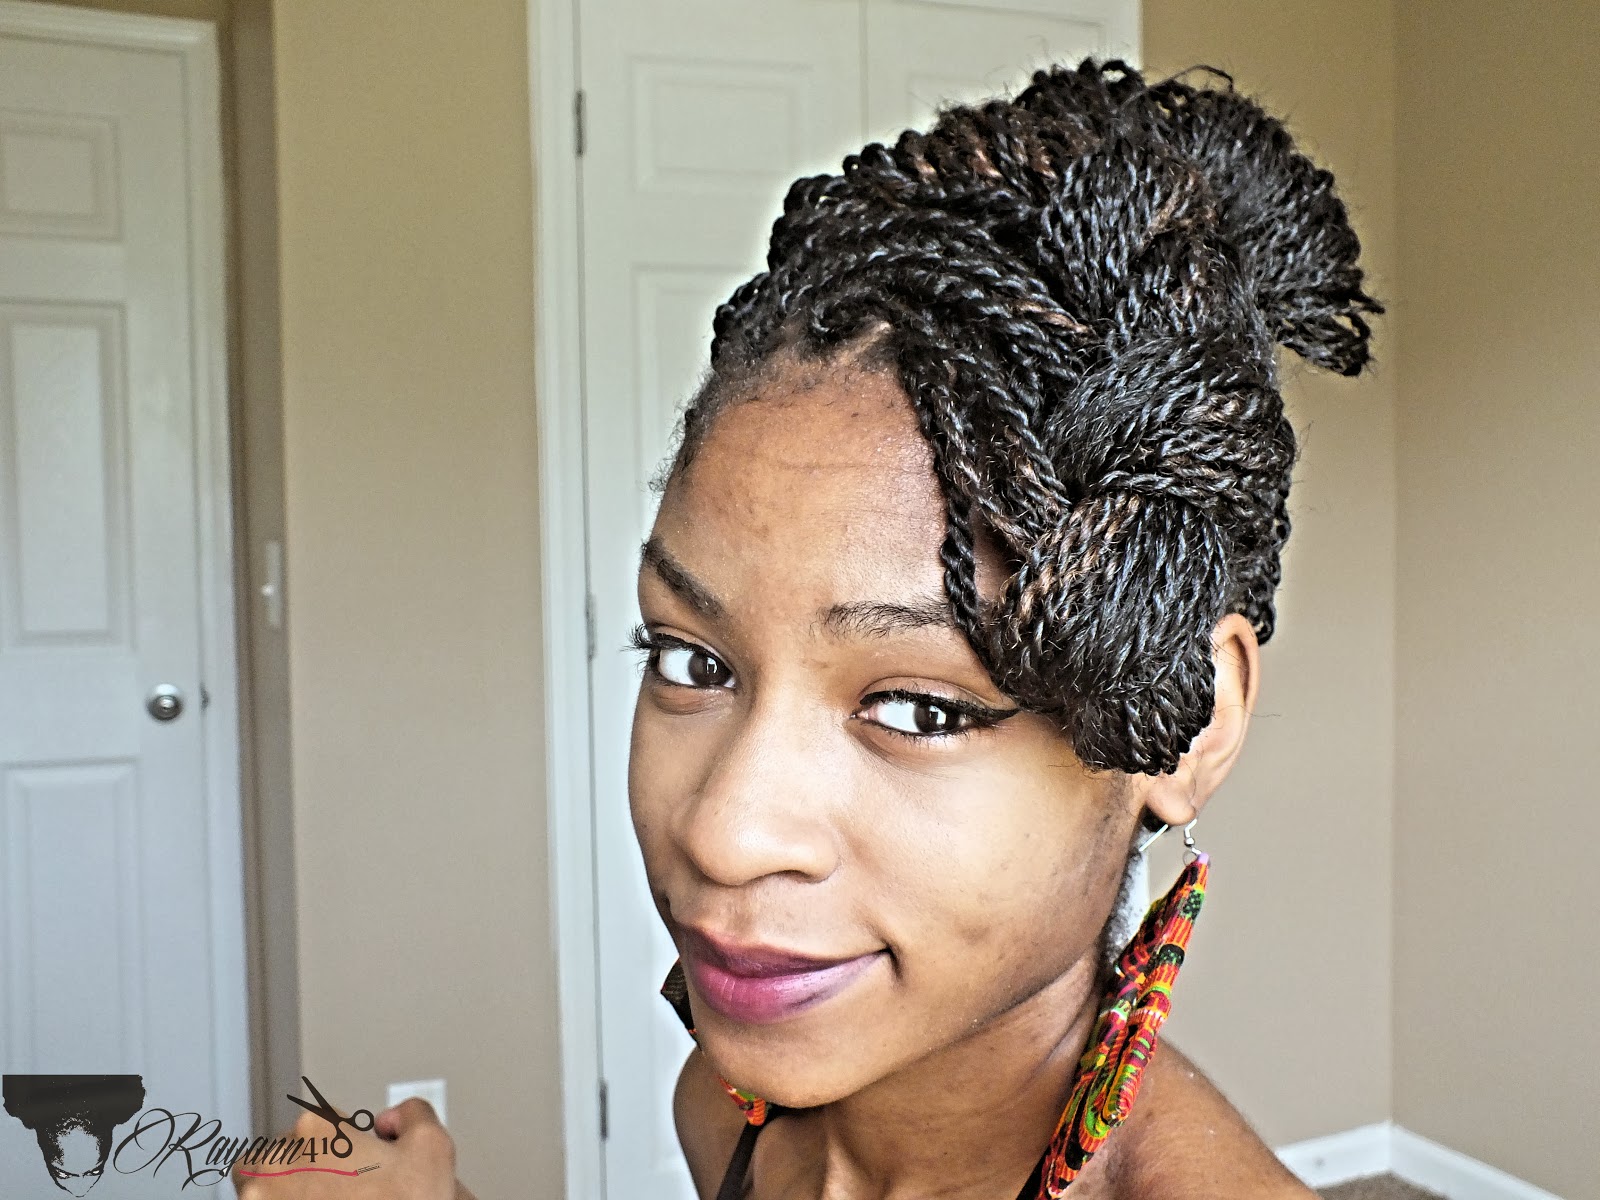 Braided Hairstyles For Black Women 2013 Senegalese Twists/ Box Braids Hairstyles: Faux Side Bang Updo Tutorial